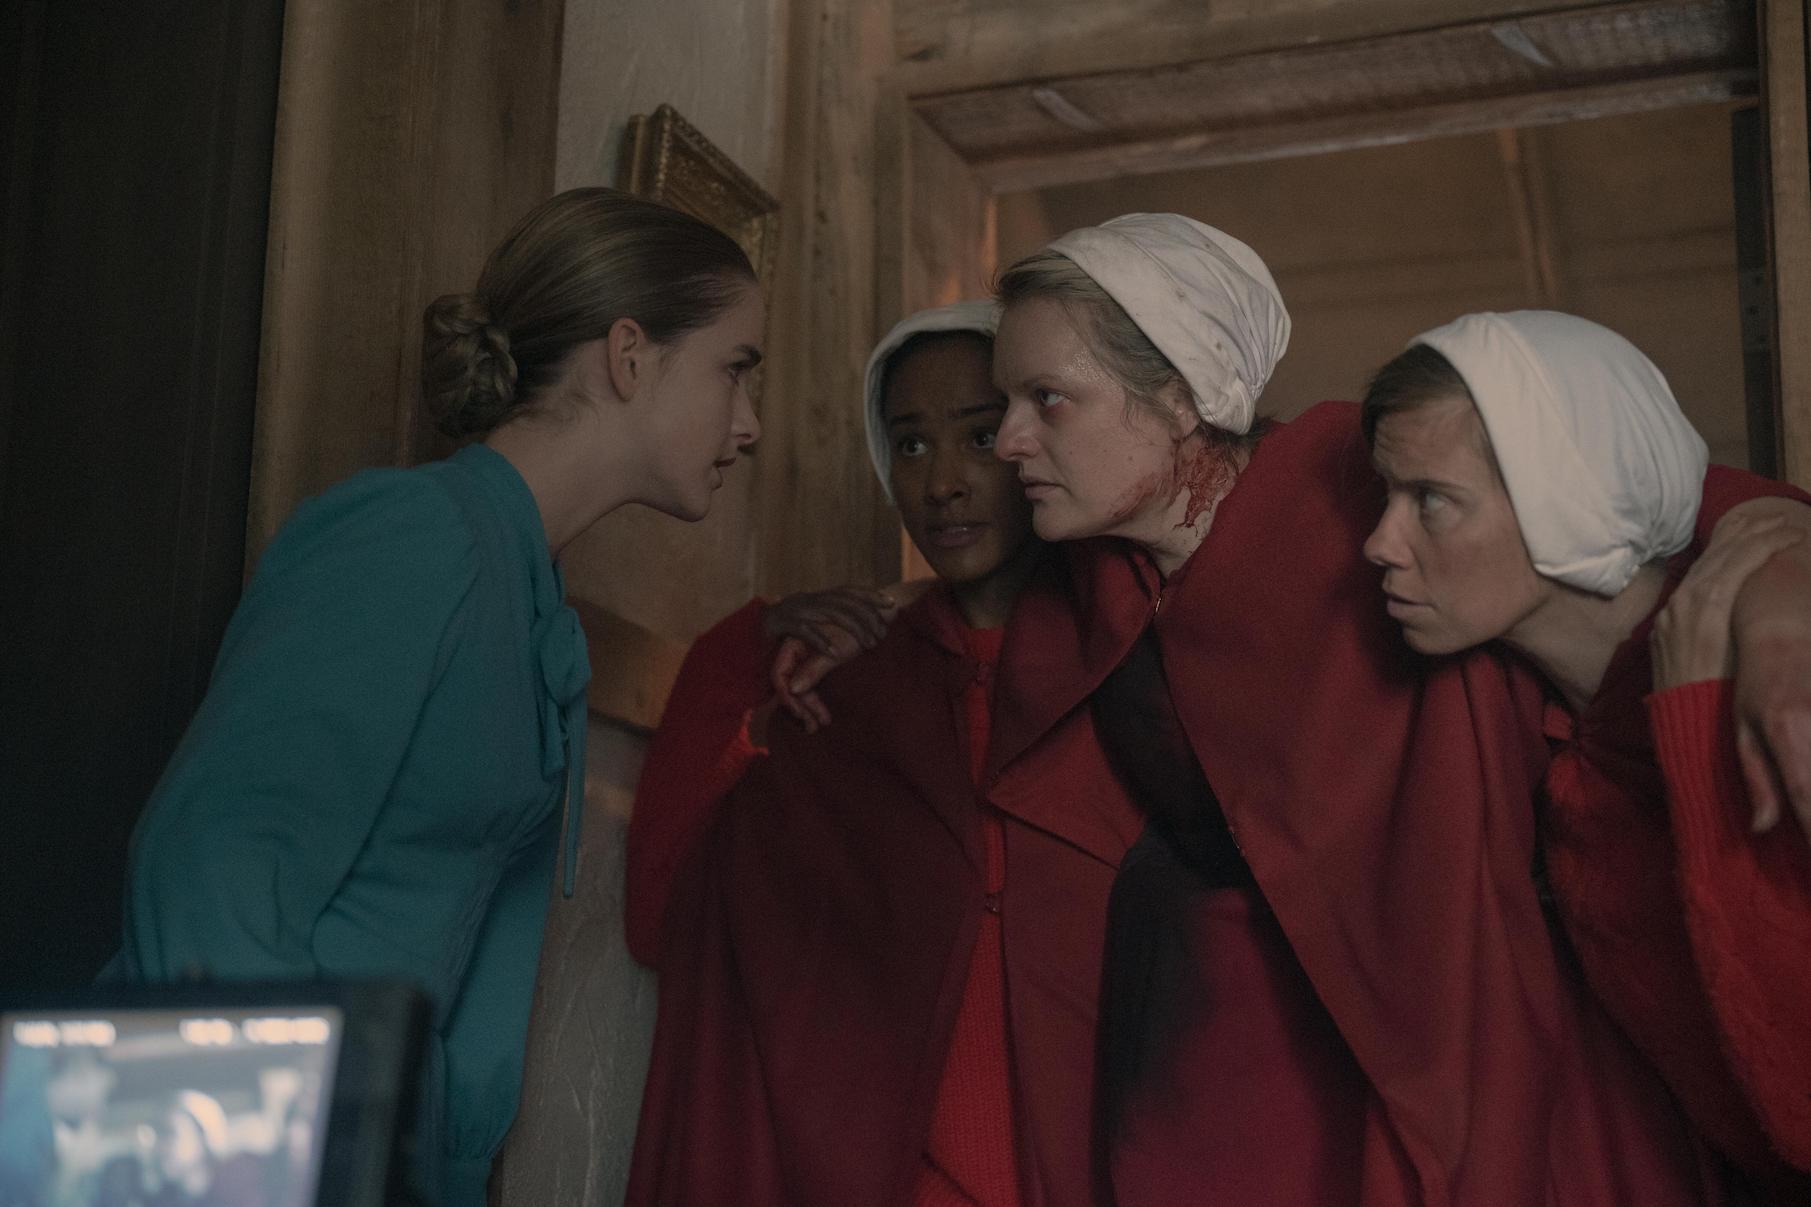 Three of the handmaids talking to Esther in The Handmaid's Tale Season 4